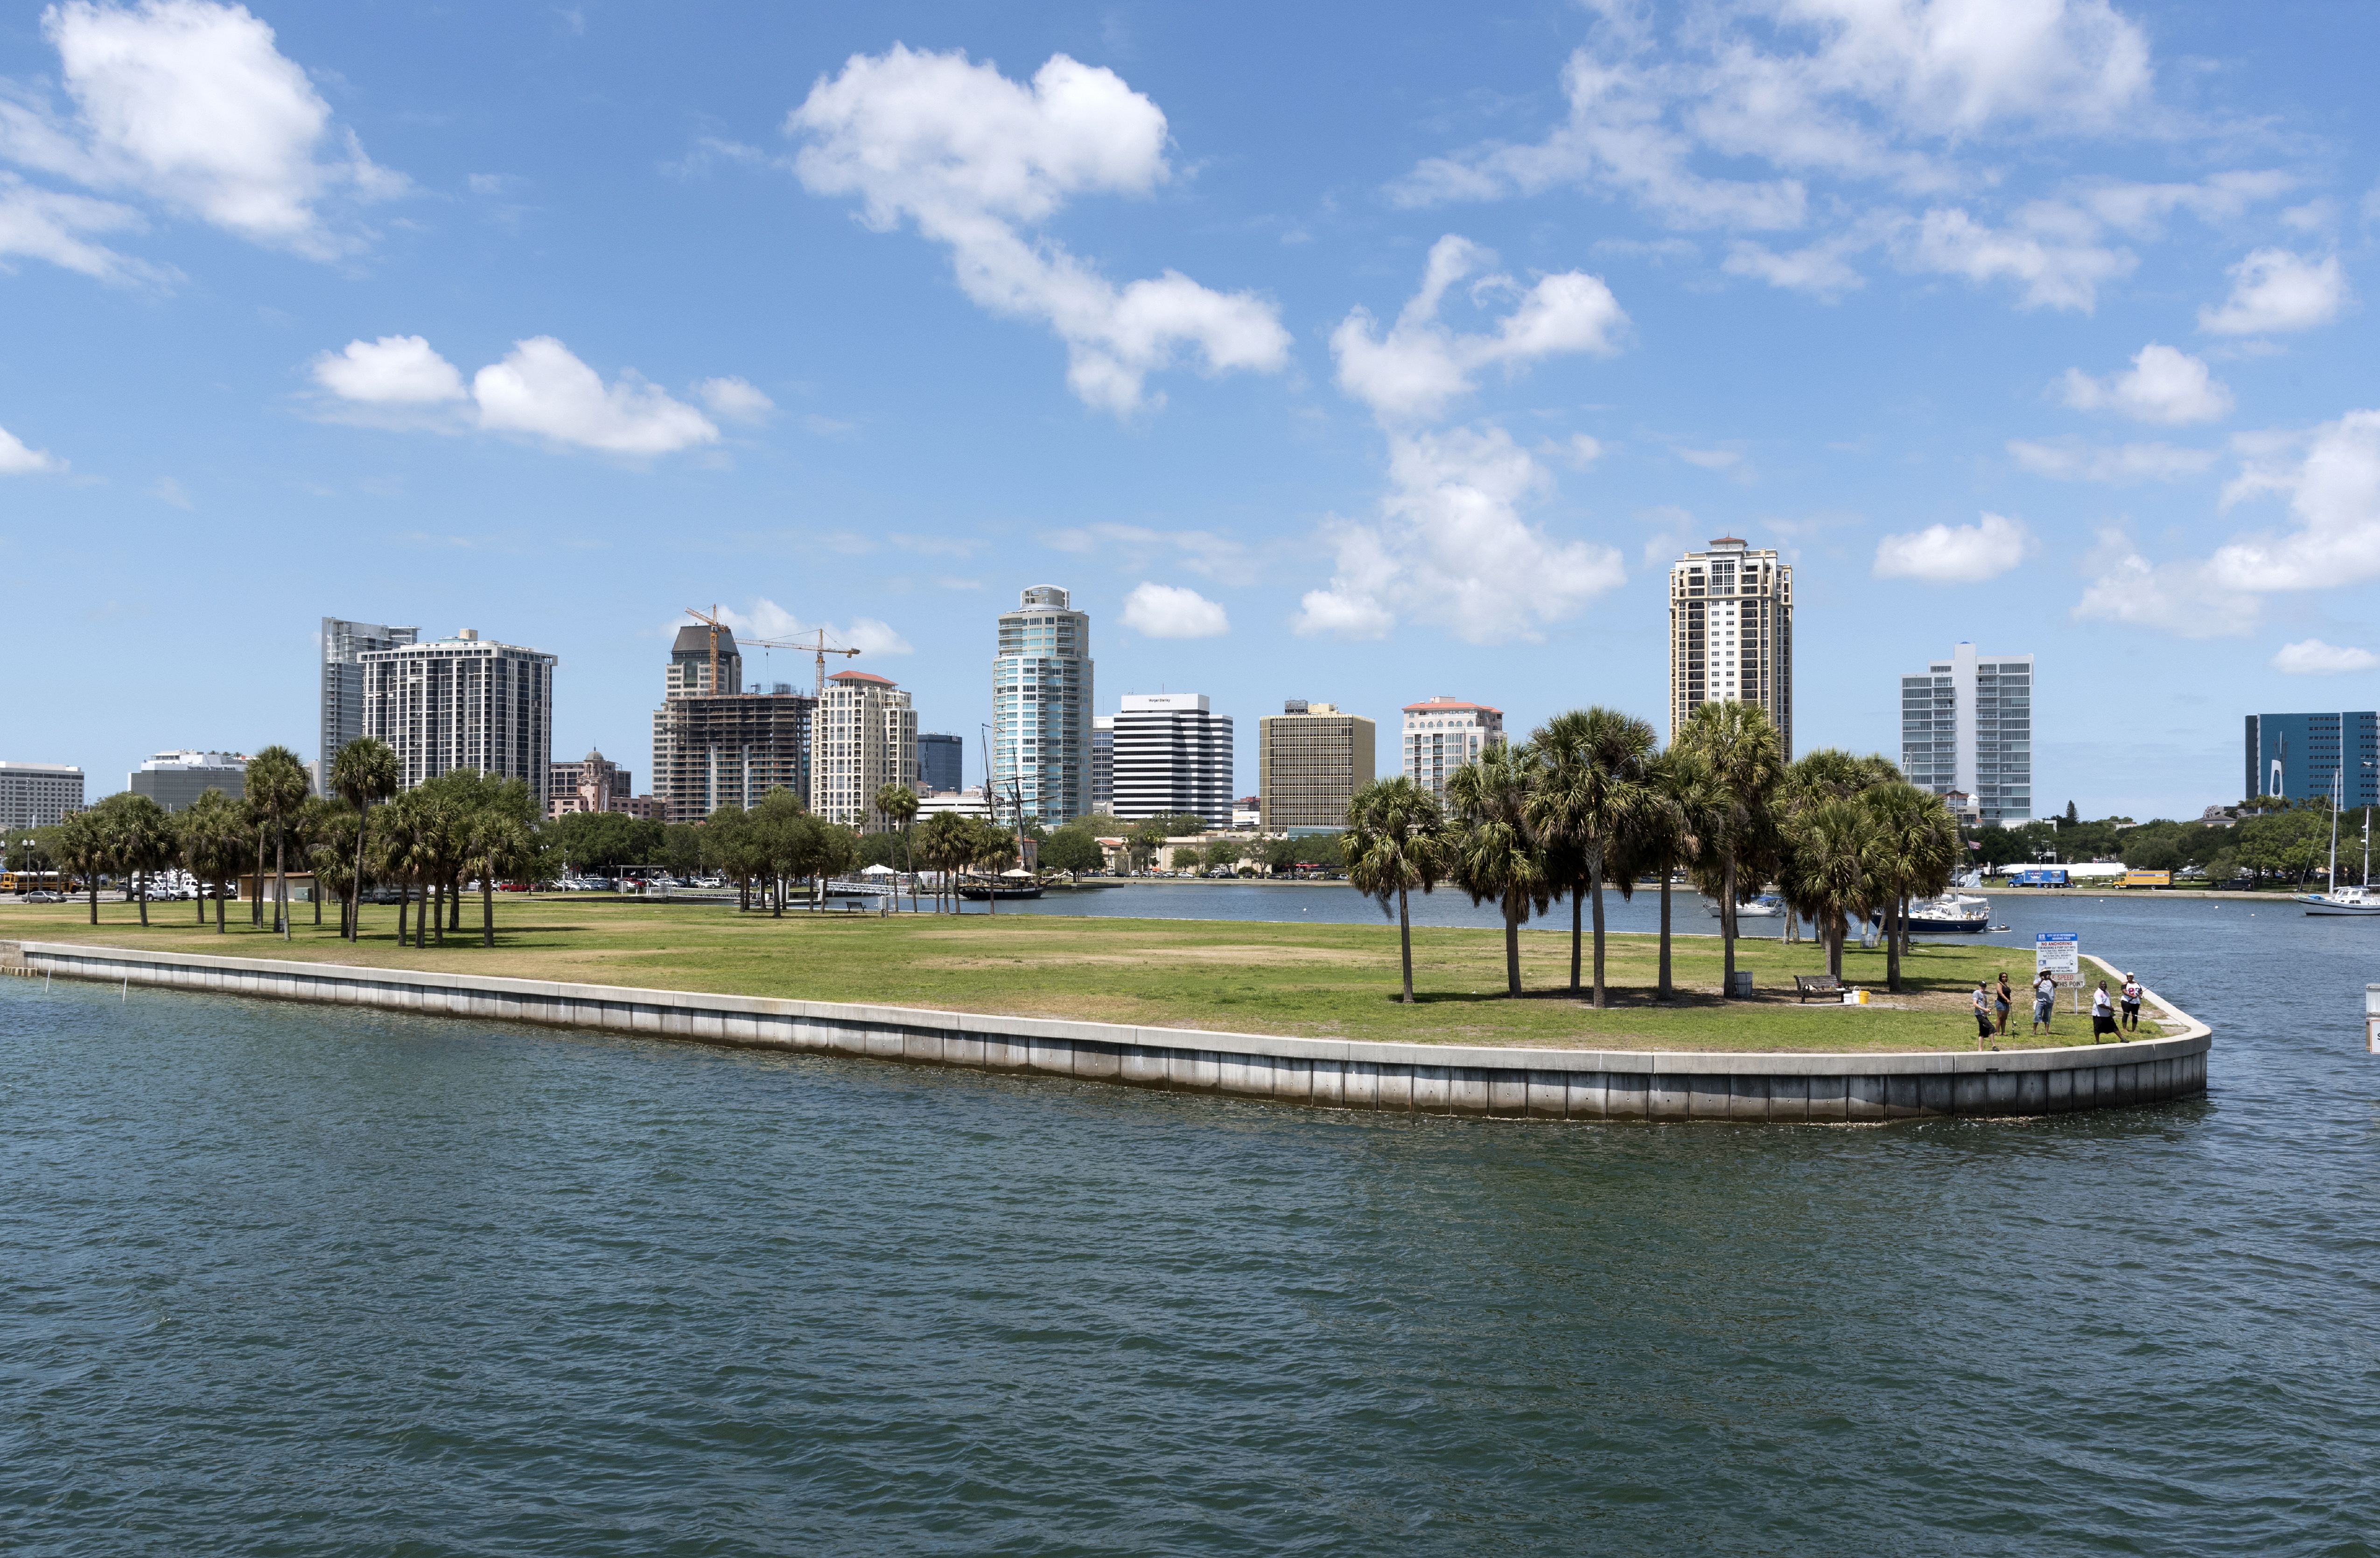 The Mooring Field and skyline view at the harbor entrance to St Petersburg Florida USA.